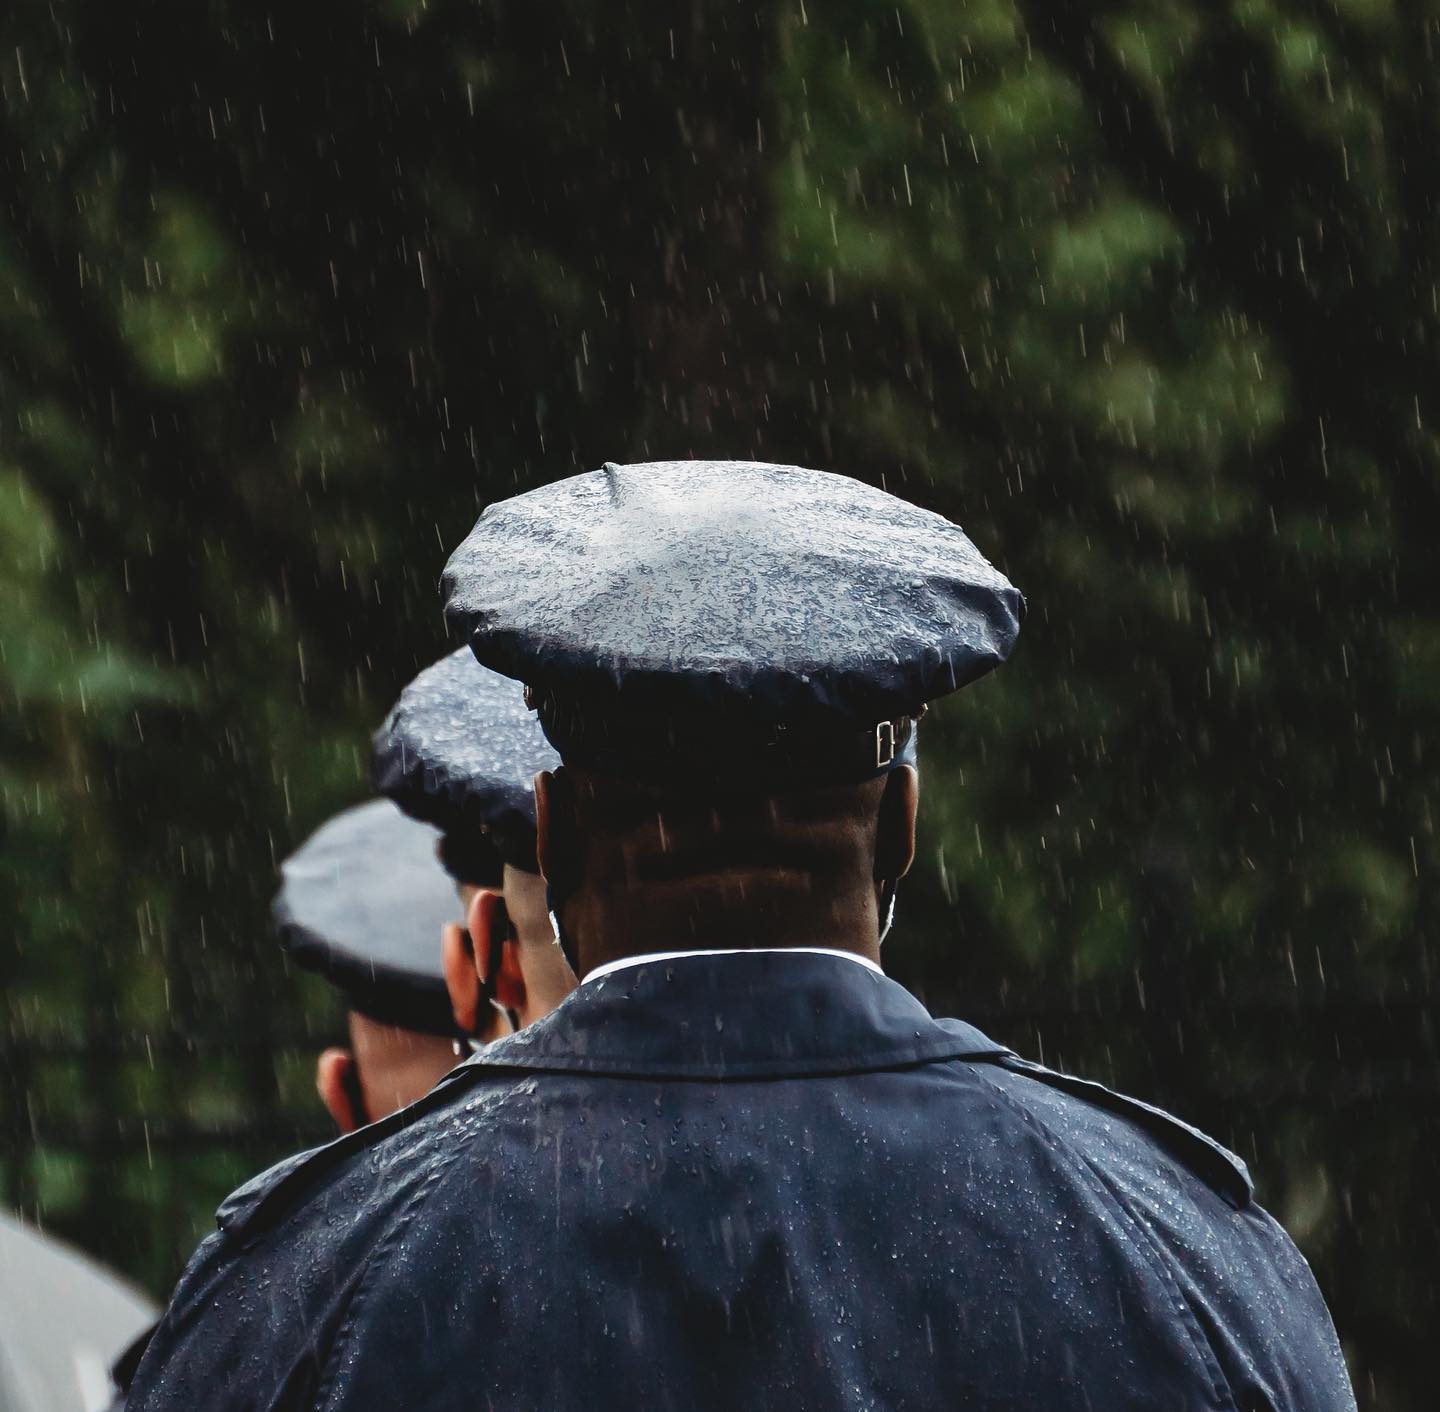 Rain or shine. Snow, sleet, or hail. Thunderstorm or blizzard. The airmen of The US Air Force Honor Guard stand ready to answer one of the nations most hallowed calls. 

With rain spilling off of their ceremonial caps, they honor America’s patriots and veterans on their final mission to their resting place in Arlington National Cemetery, Arlington, Virginia.